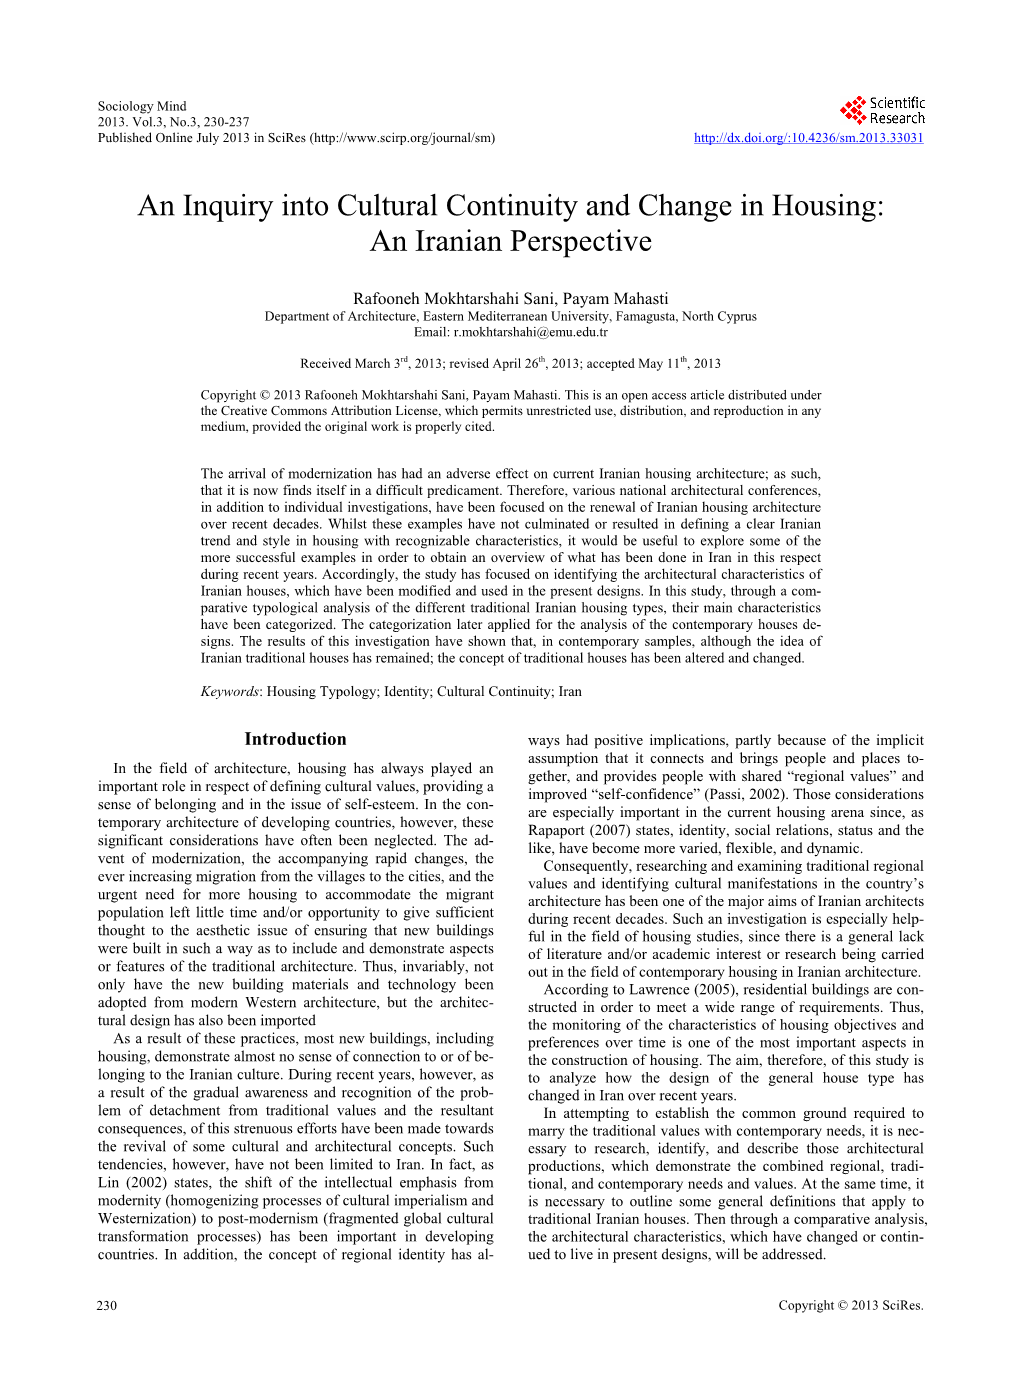 An Inquiry Into Cultural Continuity and Change in Housing: an Iranian Perspective